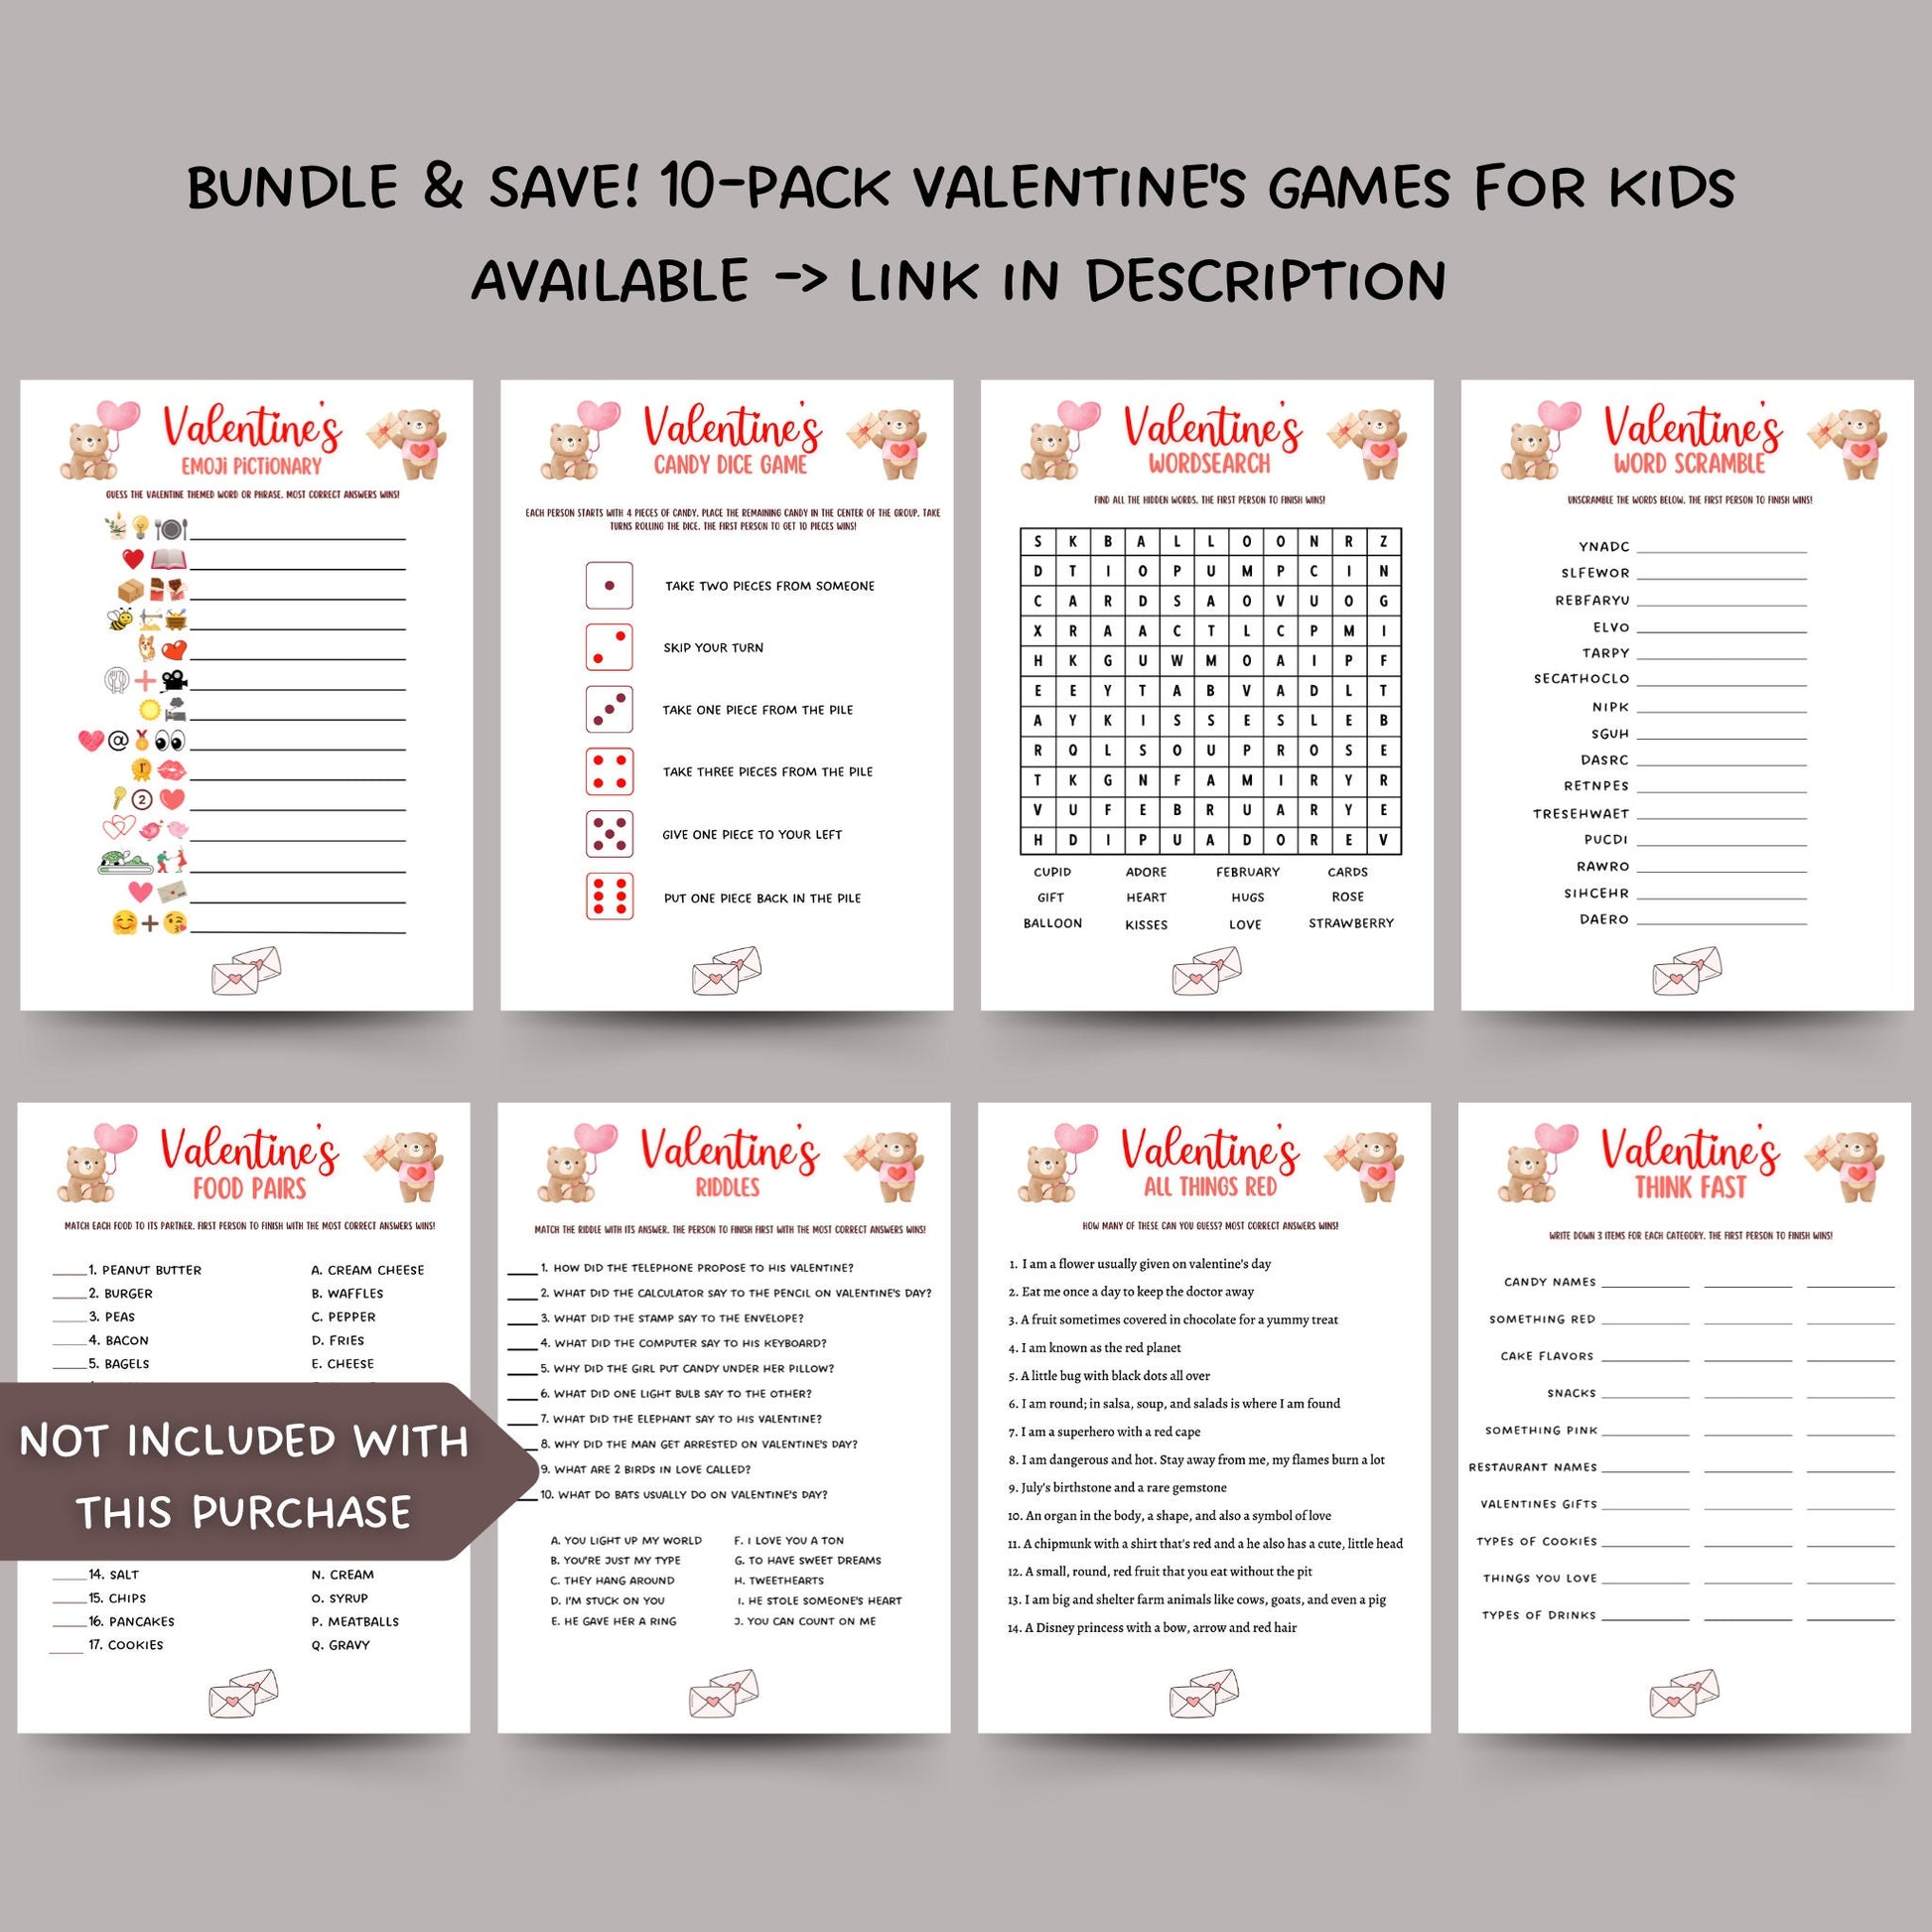 Valentine's Day Fact or Fiction Game Printable, Valentines Game True or False Trivia, Galentines Day Game, Party Game Activity, Adults/Kids